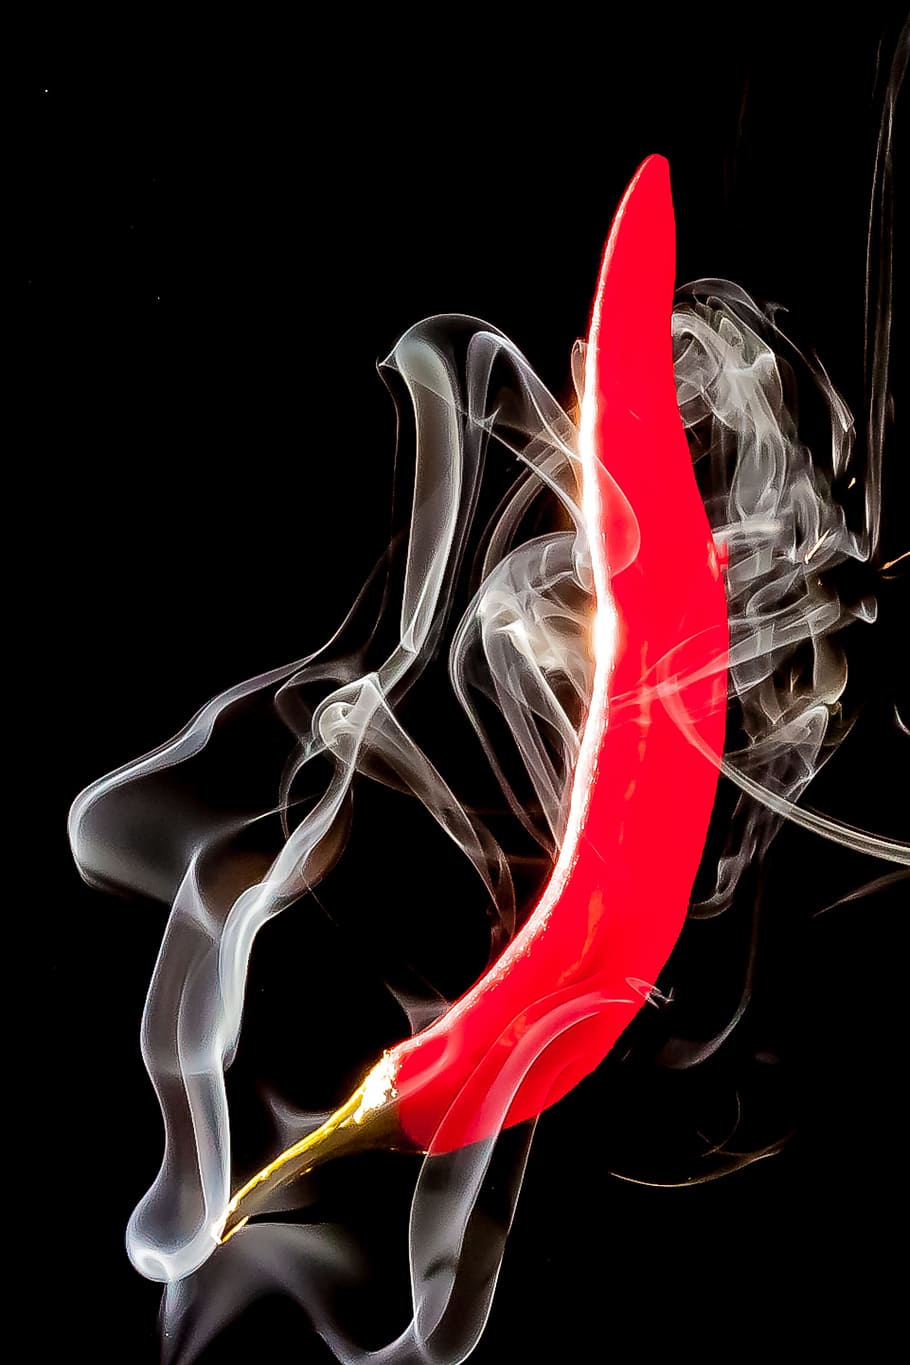 Pepperoni, Smoke, Studio, Vegetables, pepper, abstract, backgrounds, smoke - Physical Structure, black Color, flowing